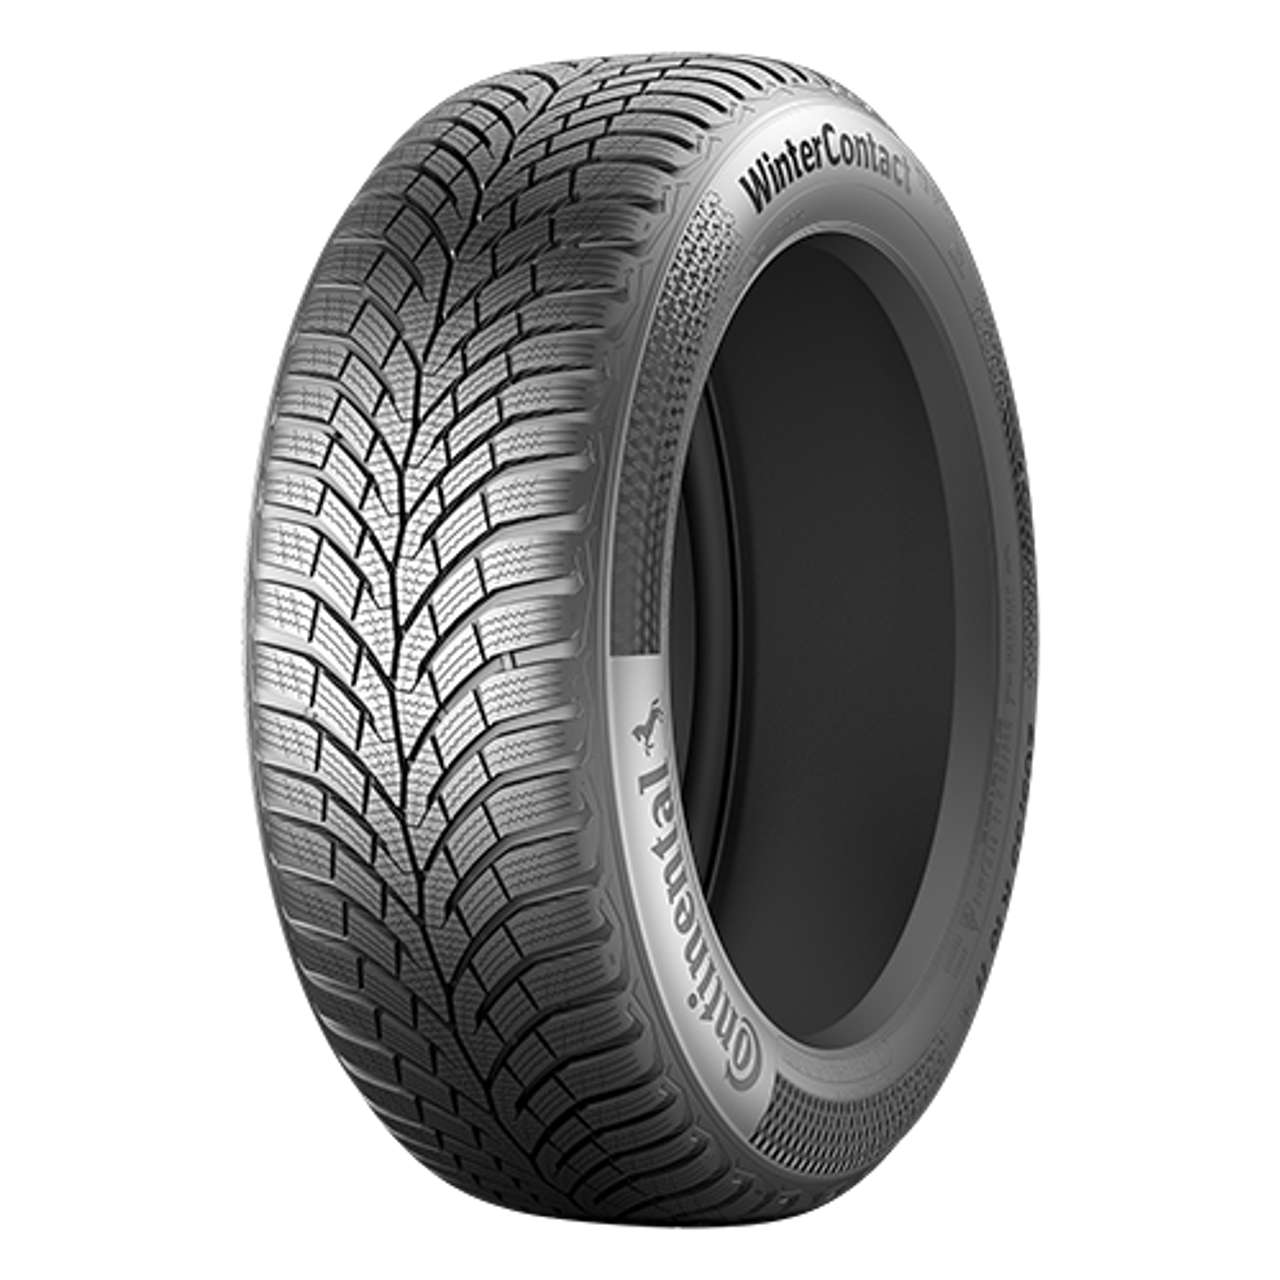 CONTINENTAL WINTERCONTACT TS 870 (EVc) 195/50R15 82T BSW von Continental